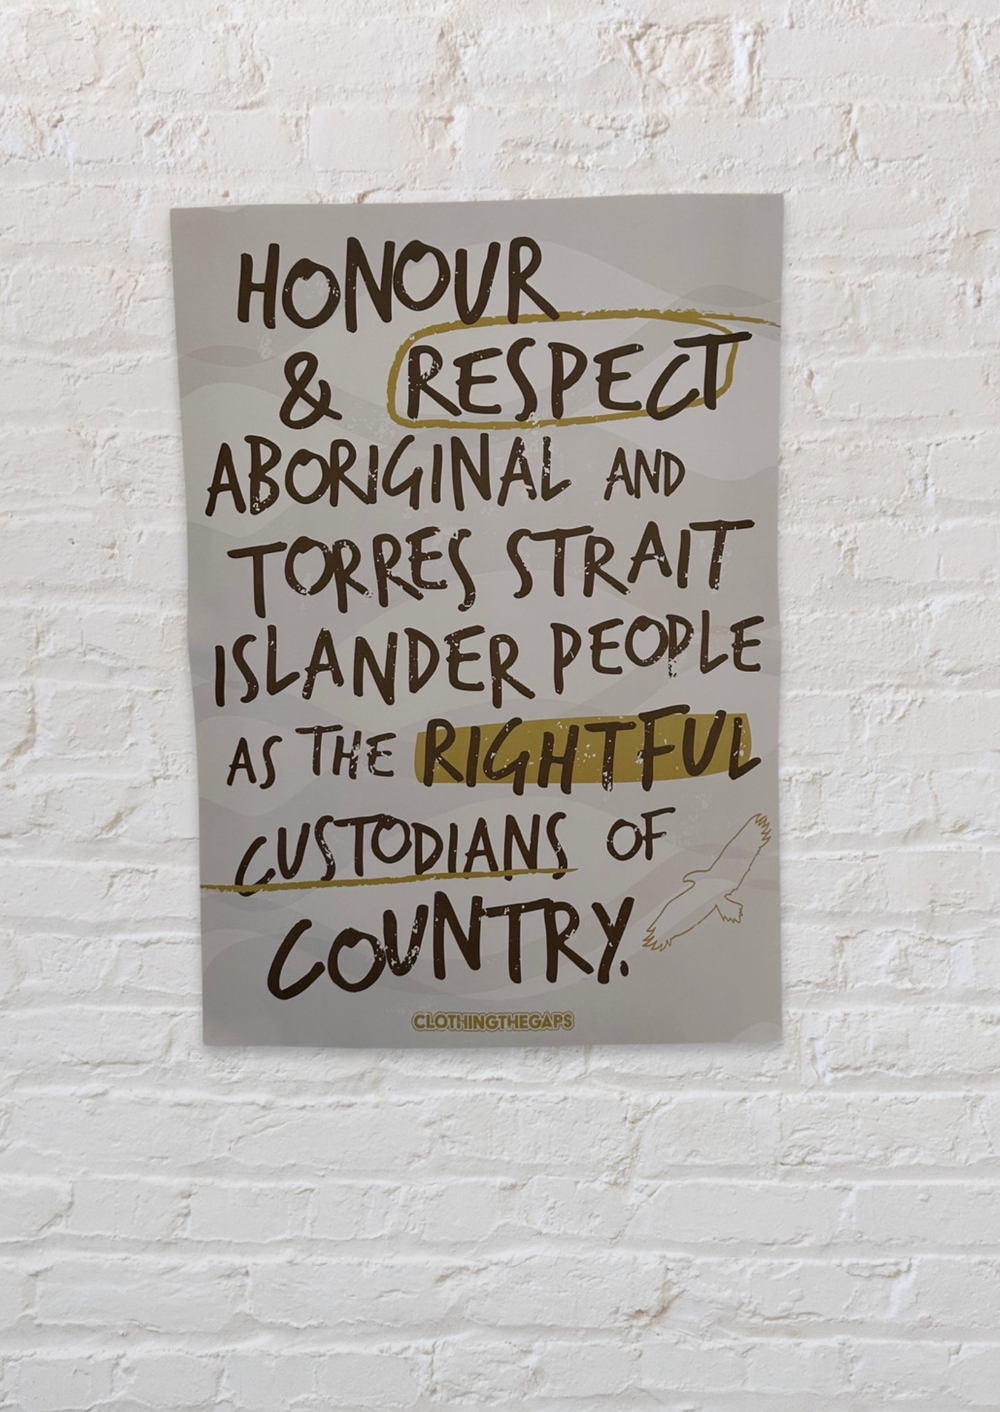 Clothing The Gaps. Handwritten Honour Country Posters. Sand background poster with dark brown hand-writen style text 'Honour and respect Aboriginal and Torres Strait Islander people as the rightful custodians of country.' Circling 'respect' underlining 'custodians' and highlighting 'rightful' in a dark mustard yellow colour. Outlined 'bunjil' eagle in bottom right corner'